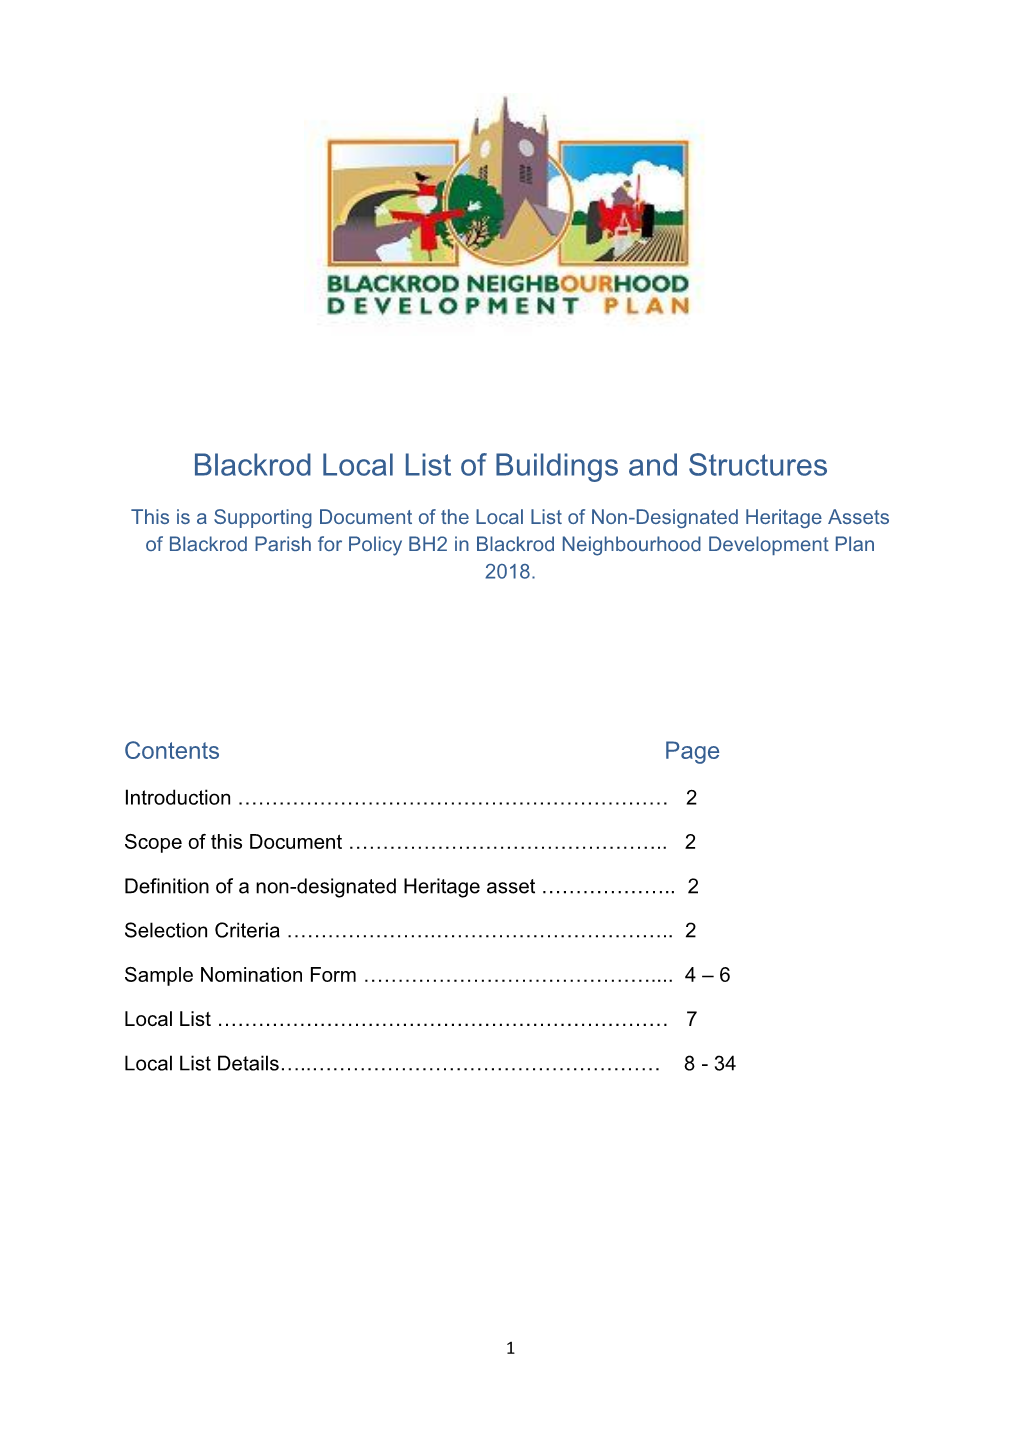 Blackrod Local List of Buildings and Structures